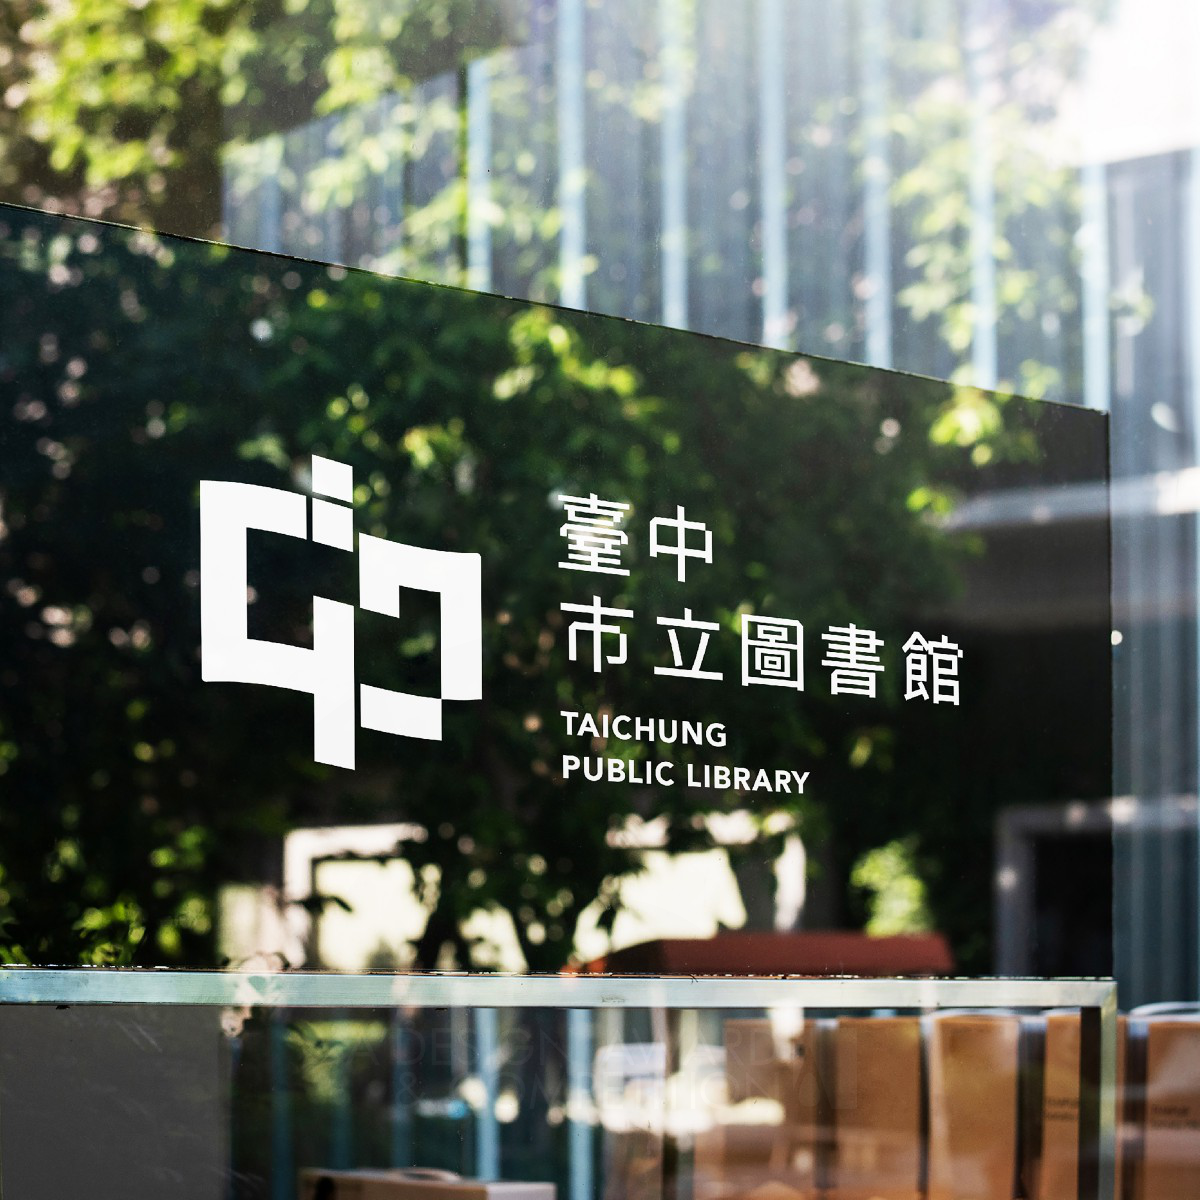 Taichung Public Library Brand Identity by Yichun Lin